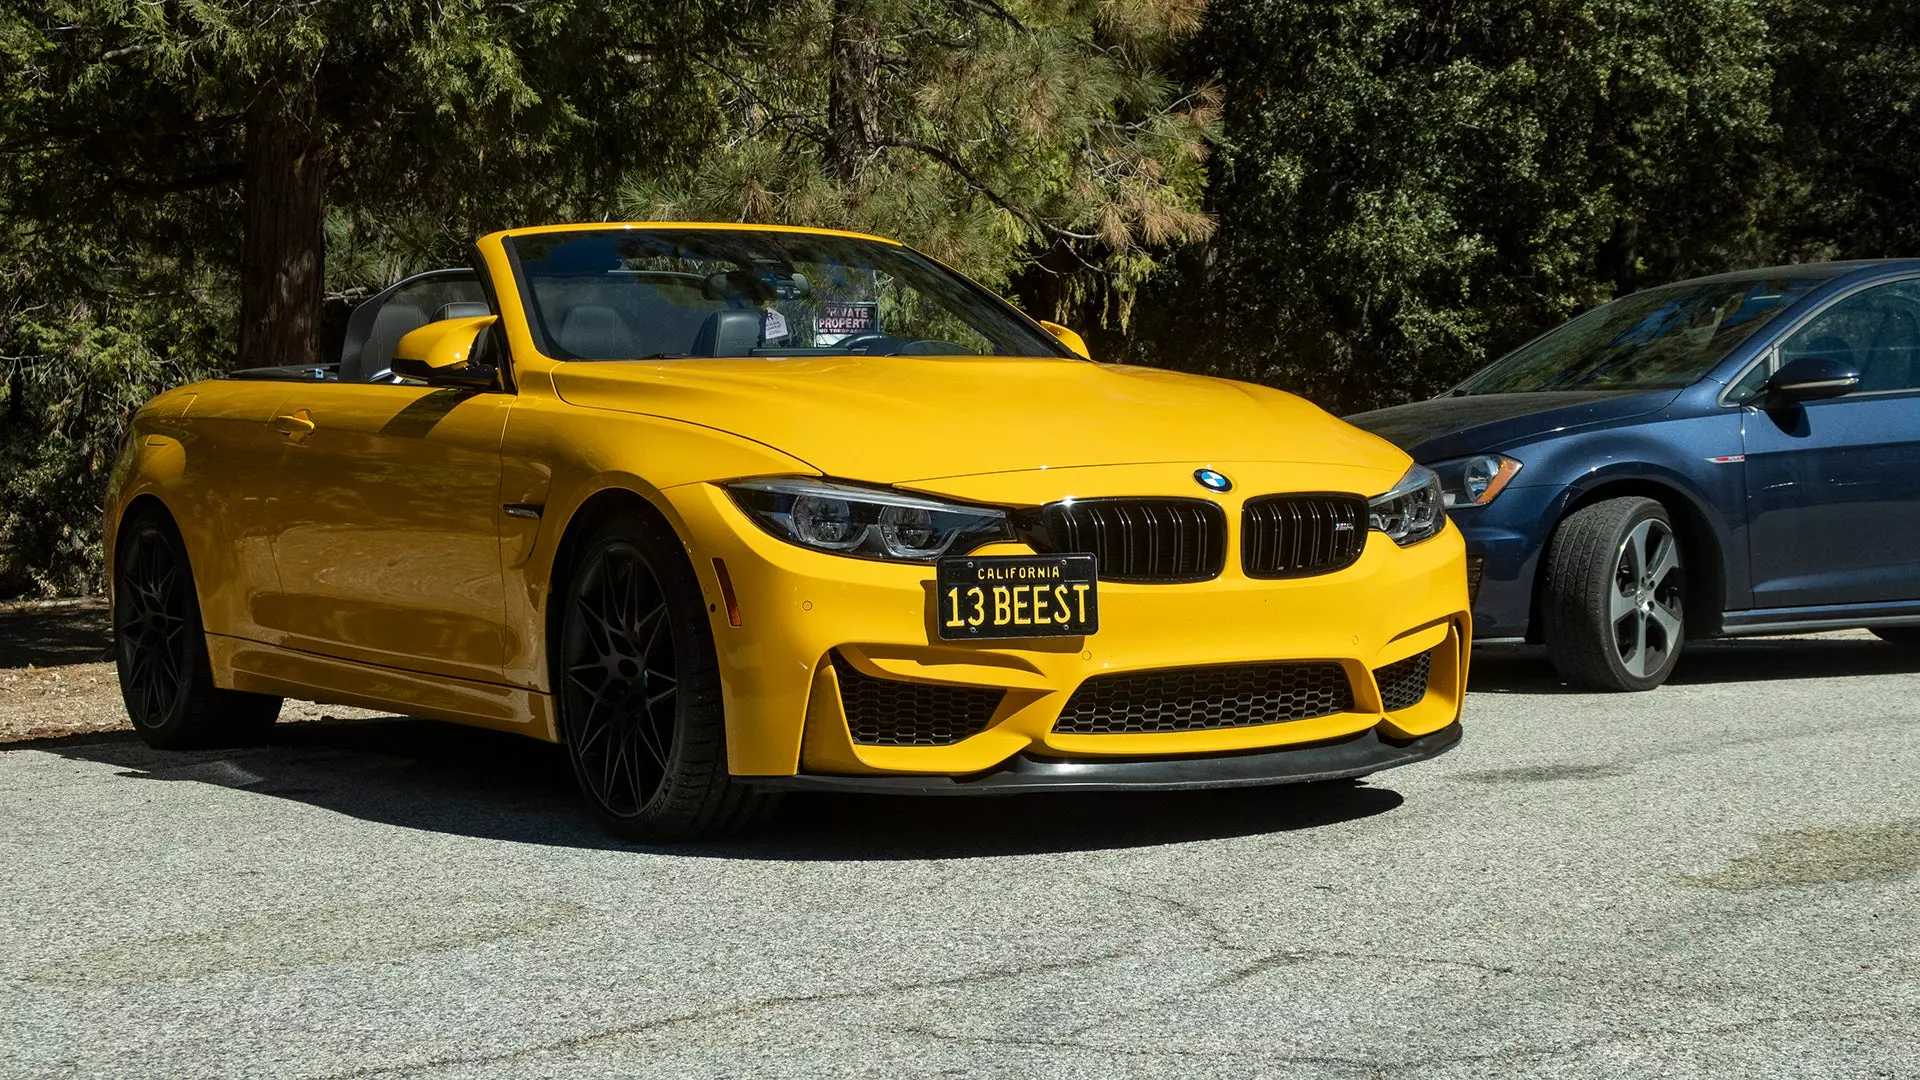 Sports Cars Could Look Good in School-Bus Yellow | Autance